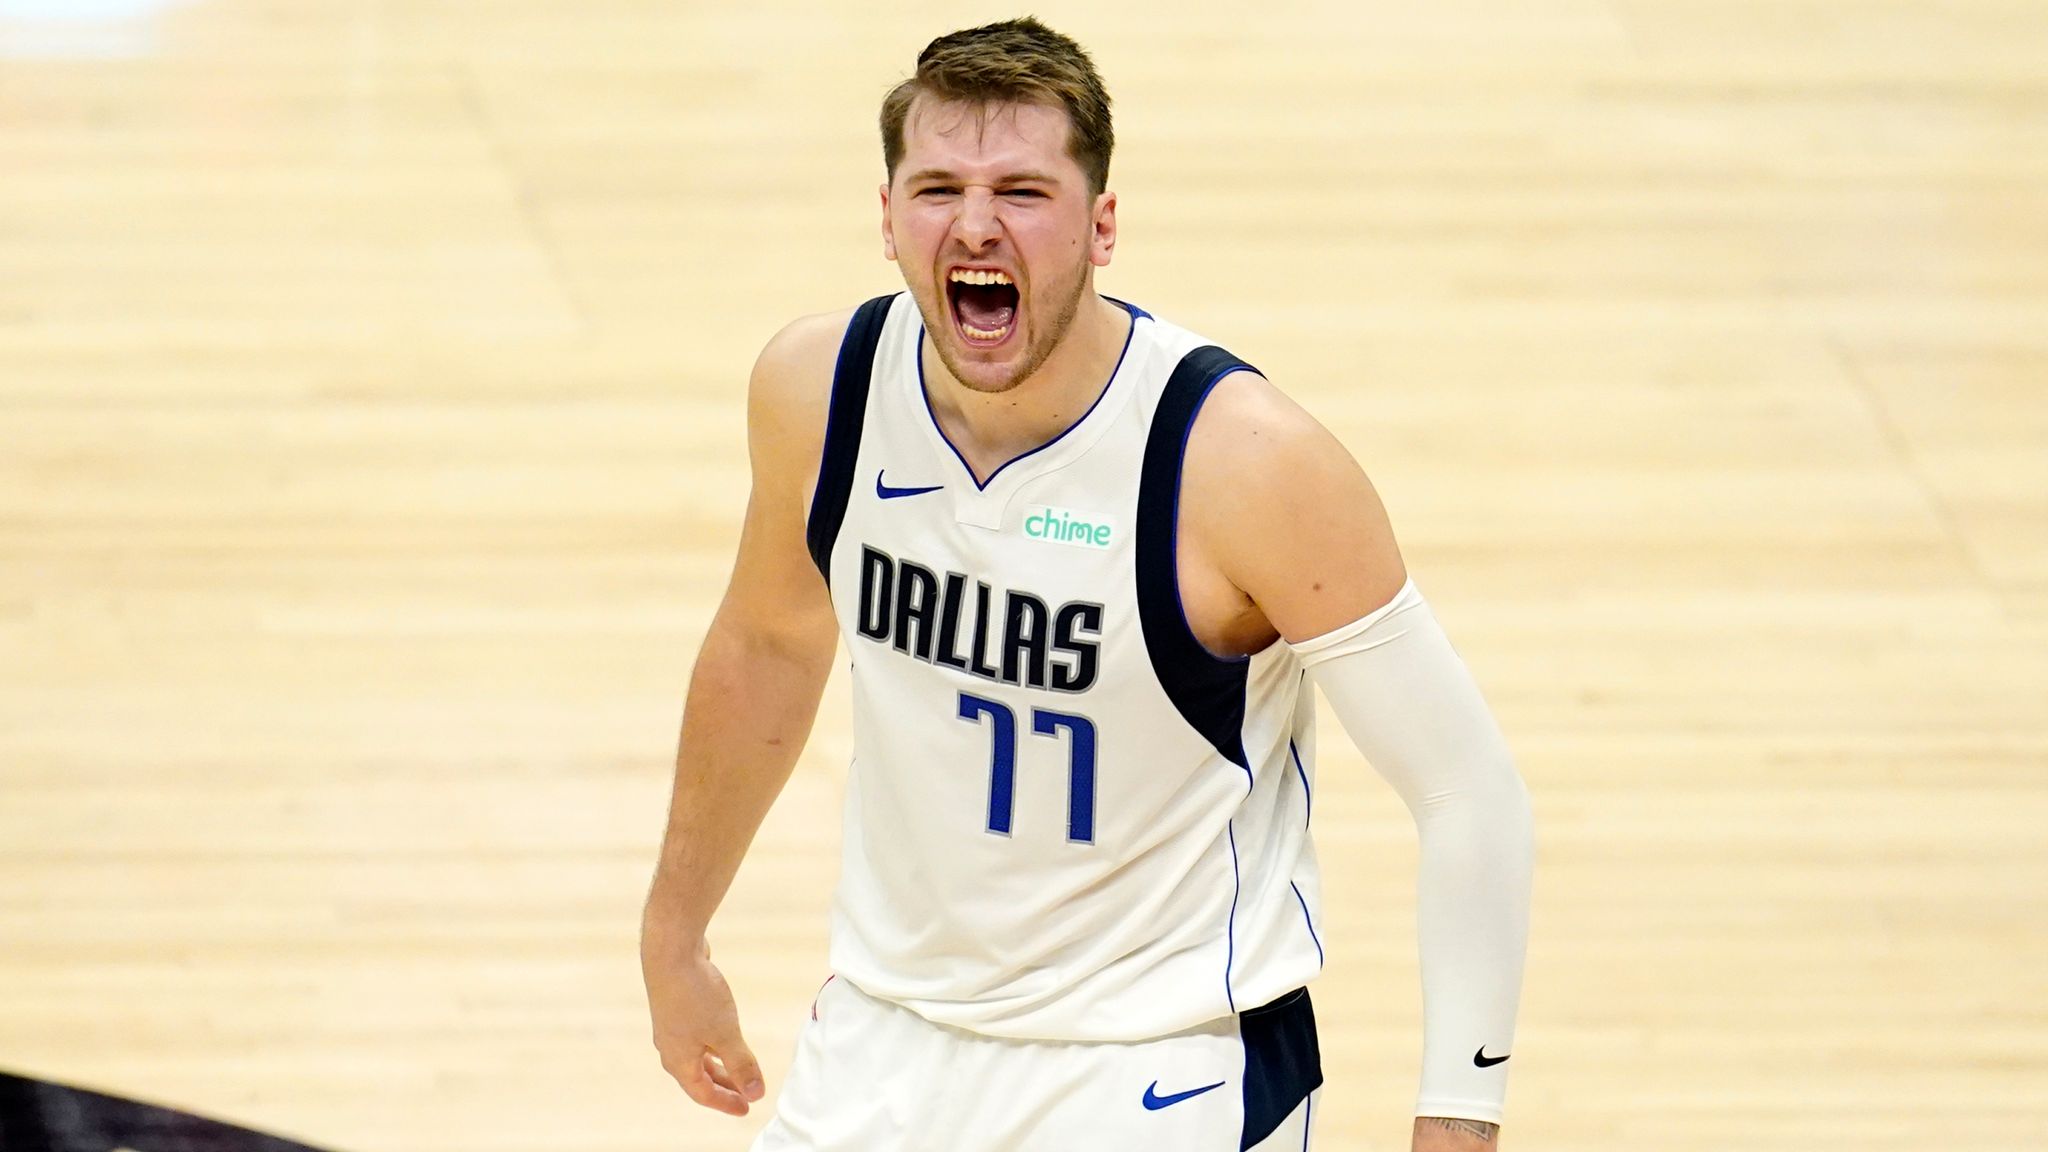 RIVALRY WEEK: Trae Young and Luka Doncic mean the Mavericks and